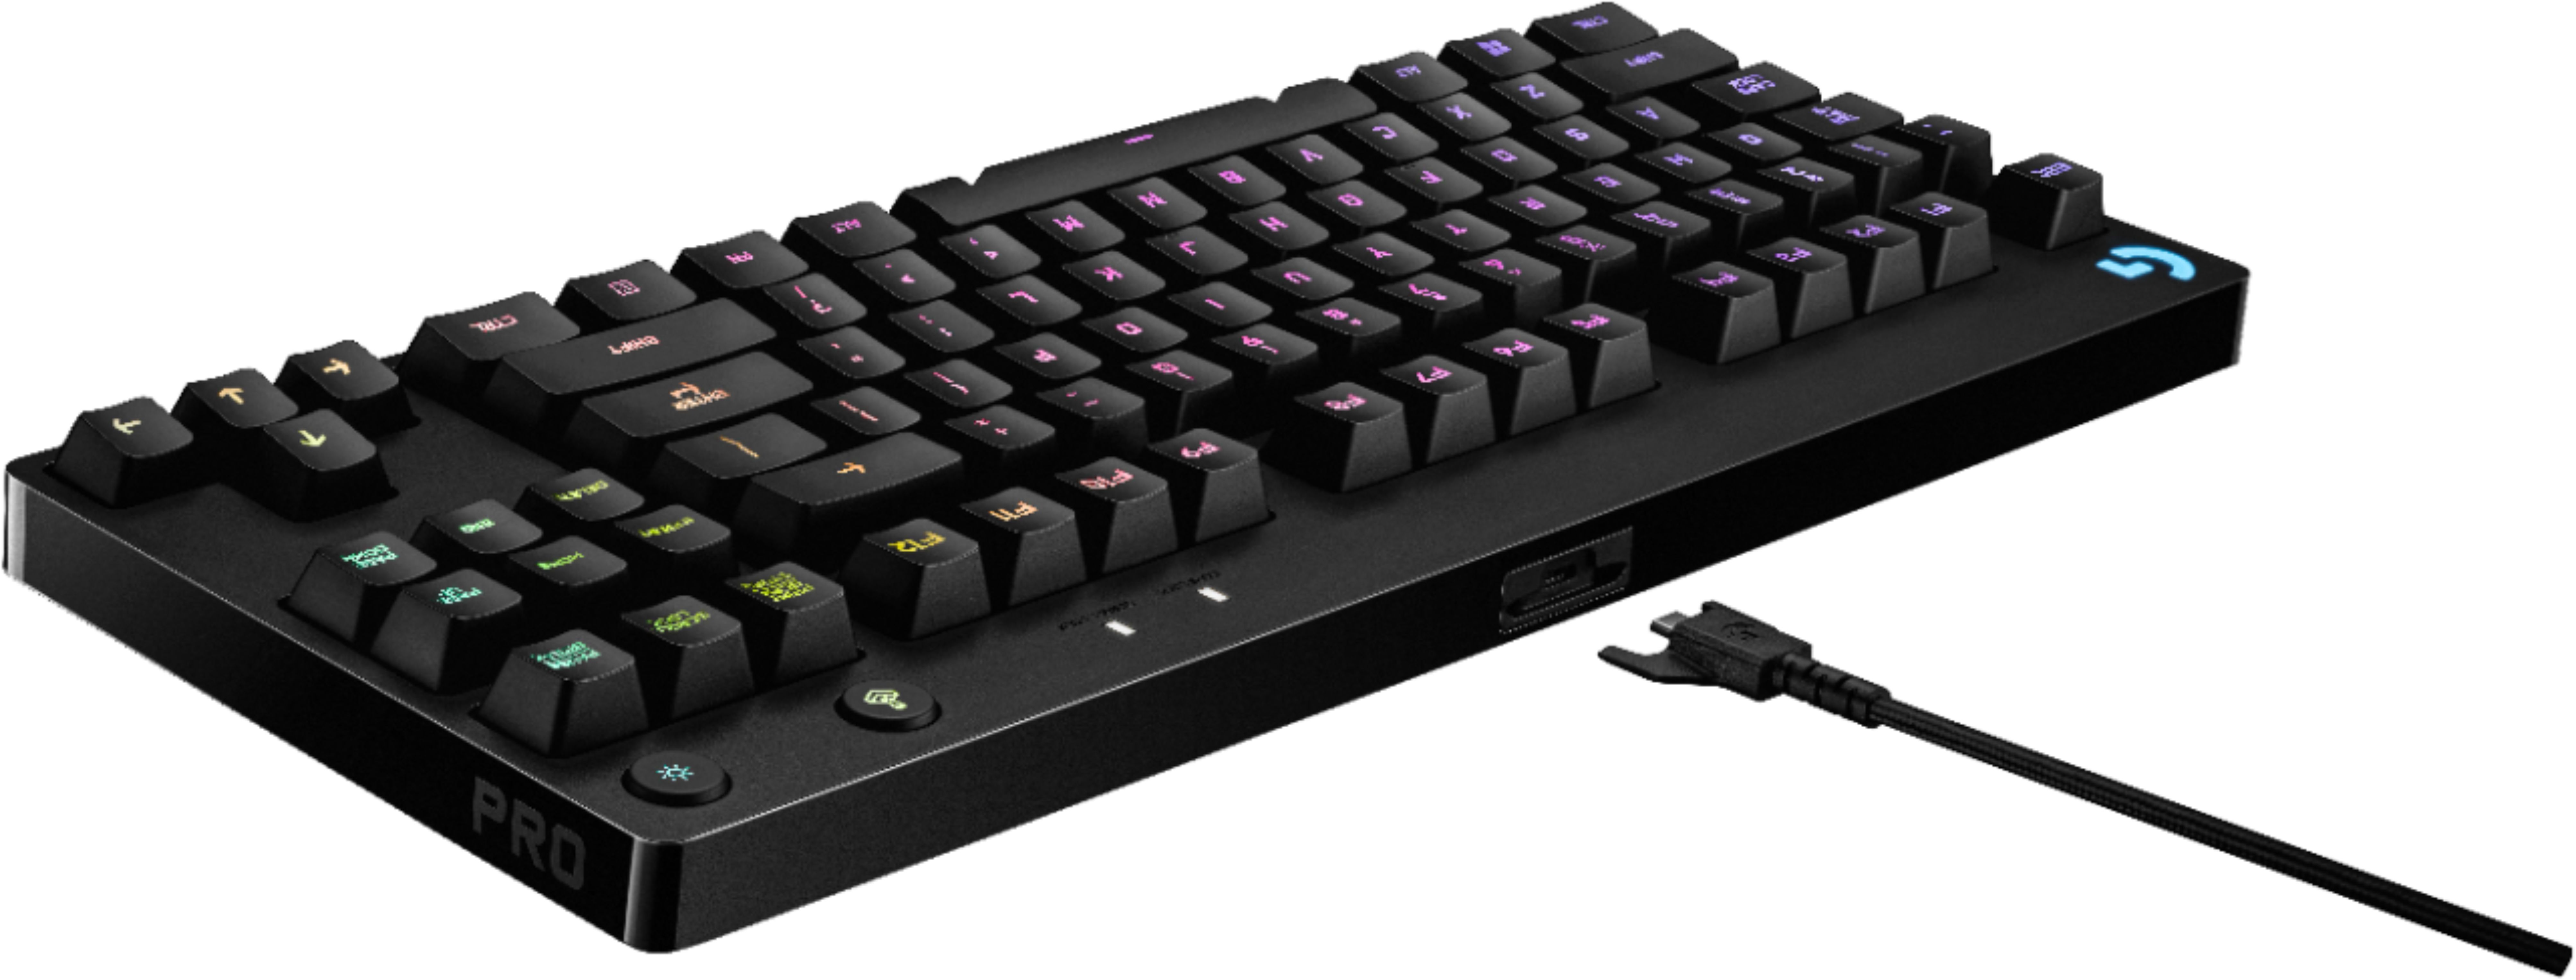 Best Buy Logitech G Pro Wired Gaming Mechanical Romer G Switch Keyboard With Rgb Backlighting Black 920 008290